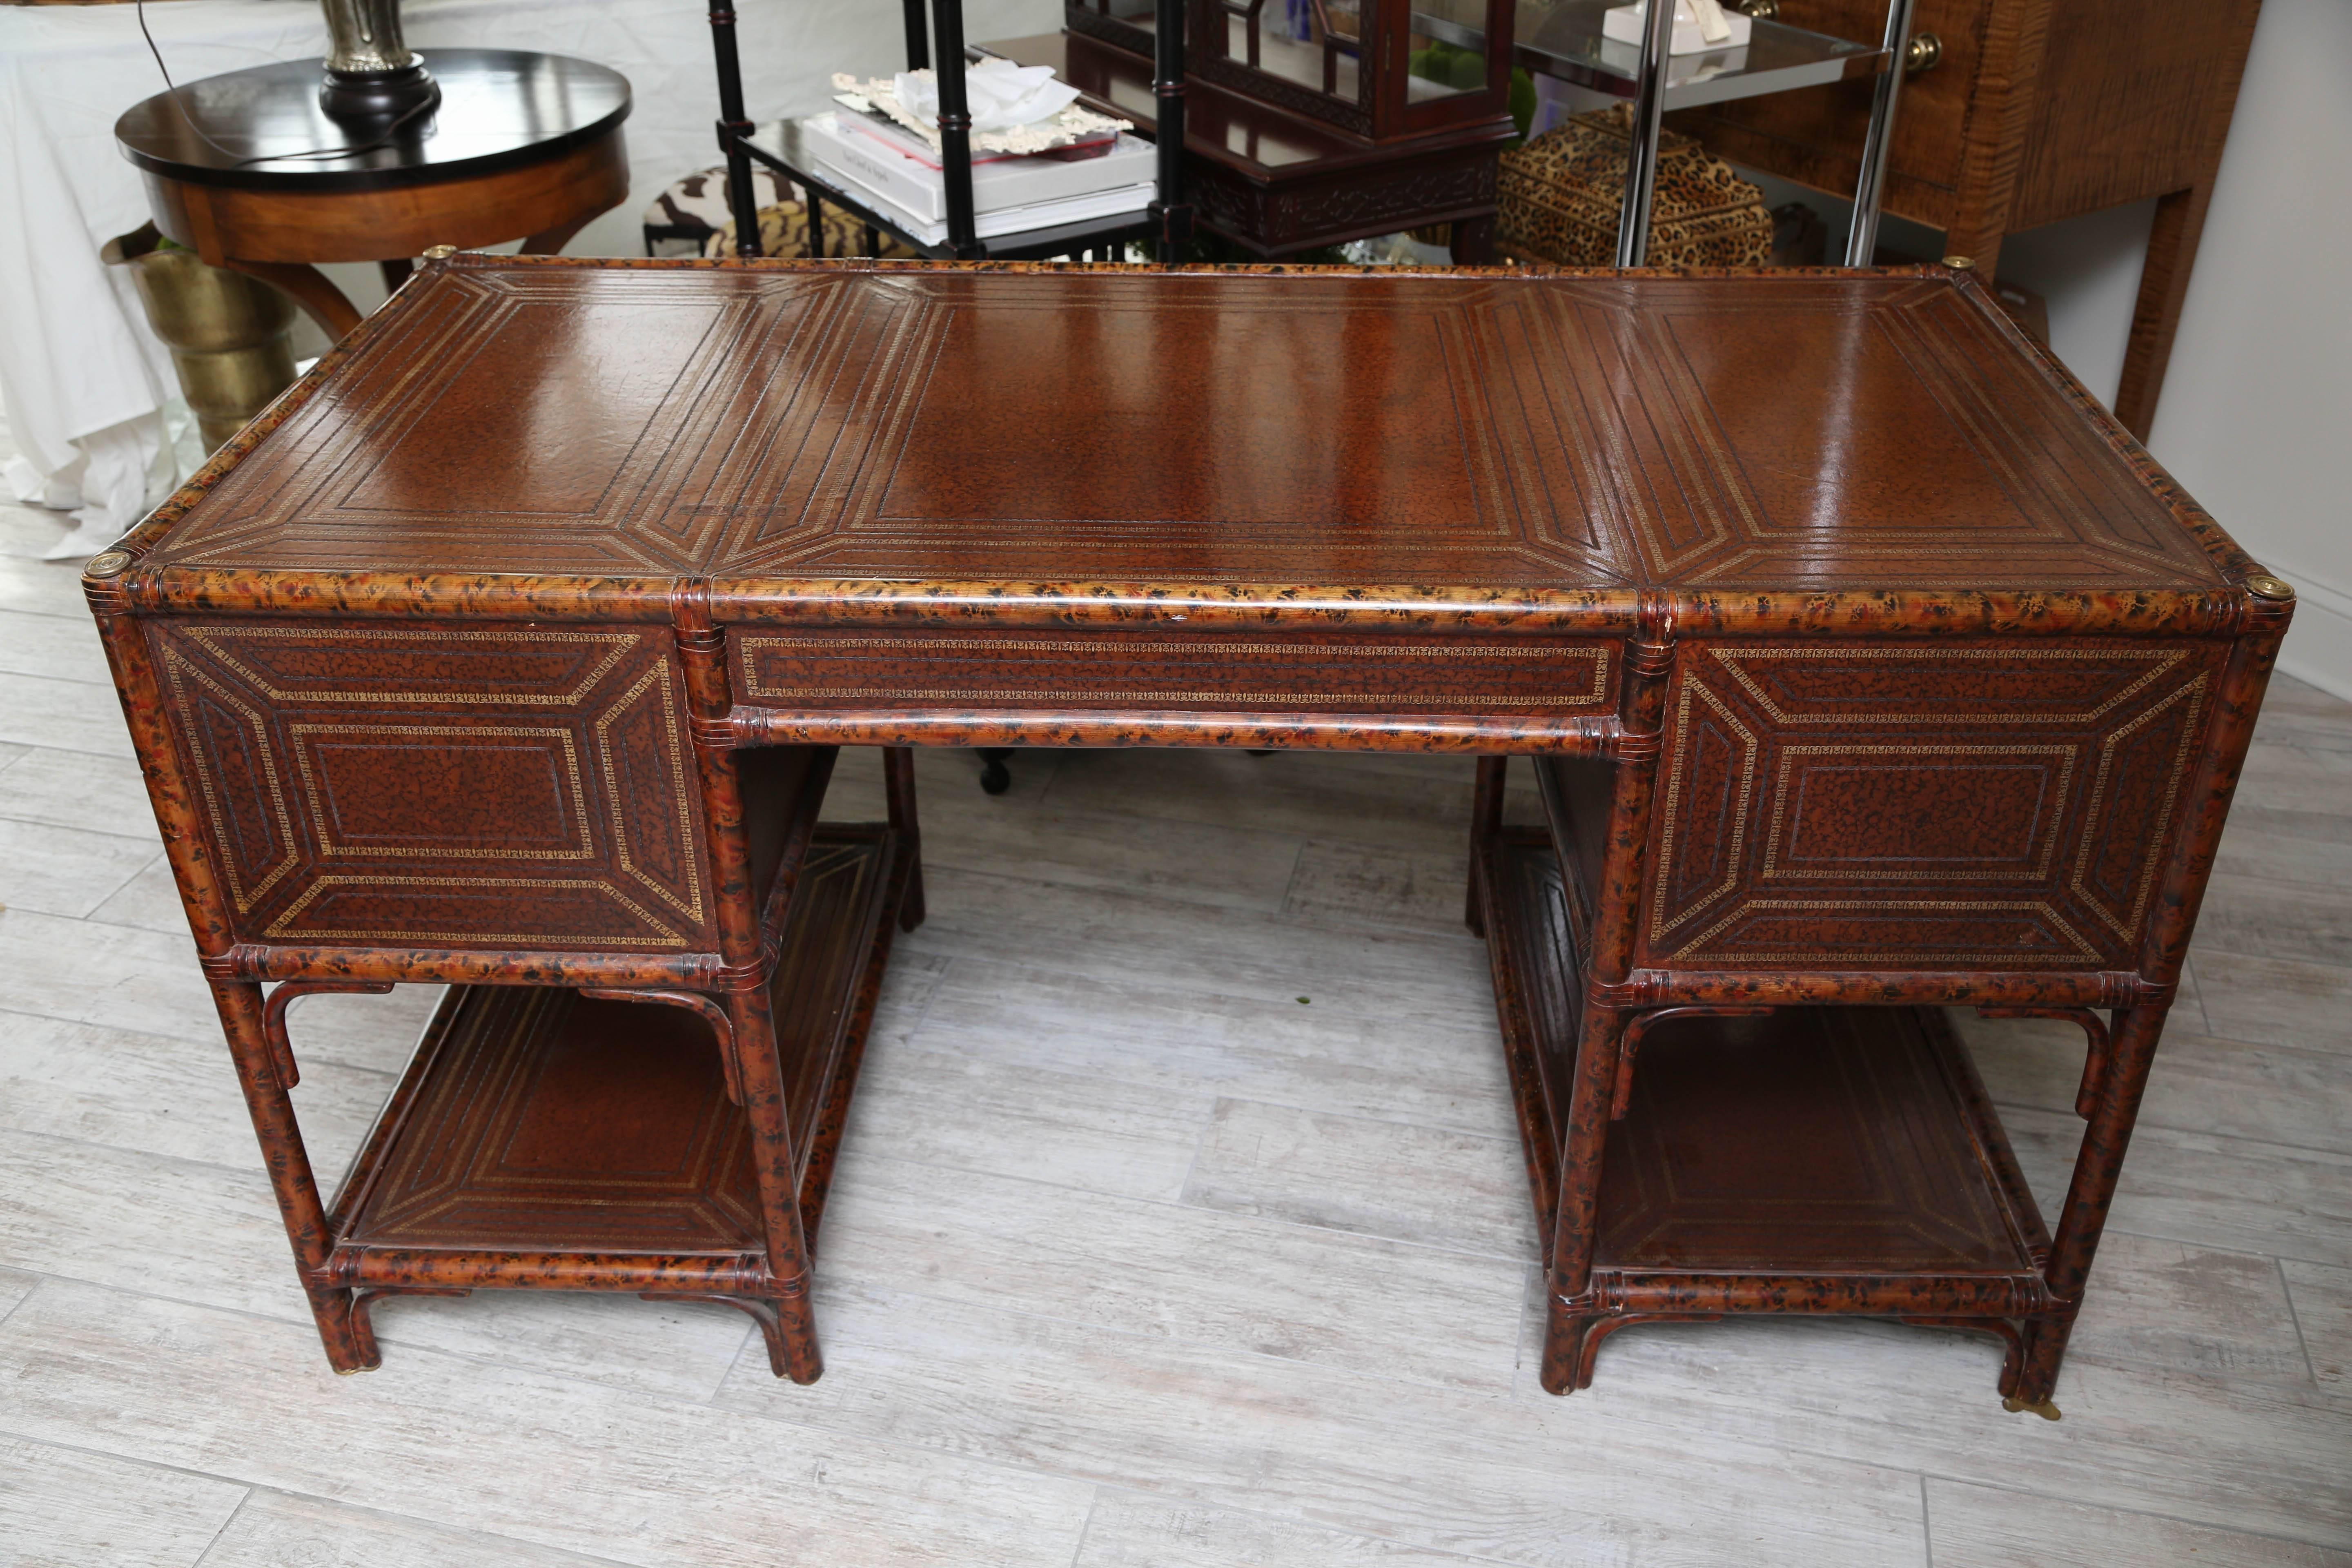 Faux bamboo tortoise style desk with embossed leather top, drawers and sides.